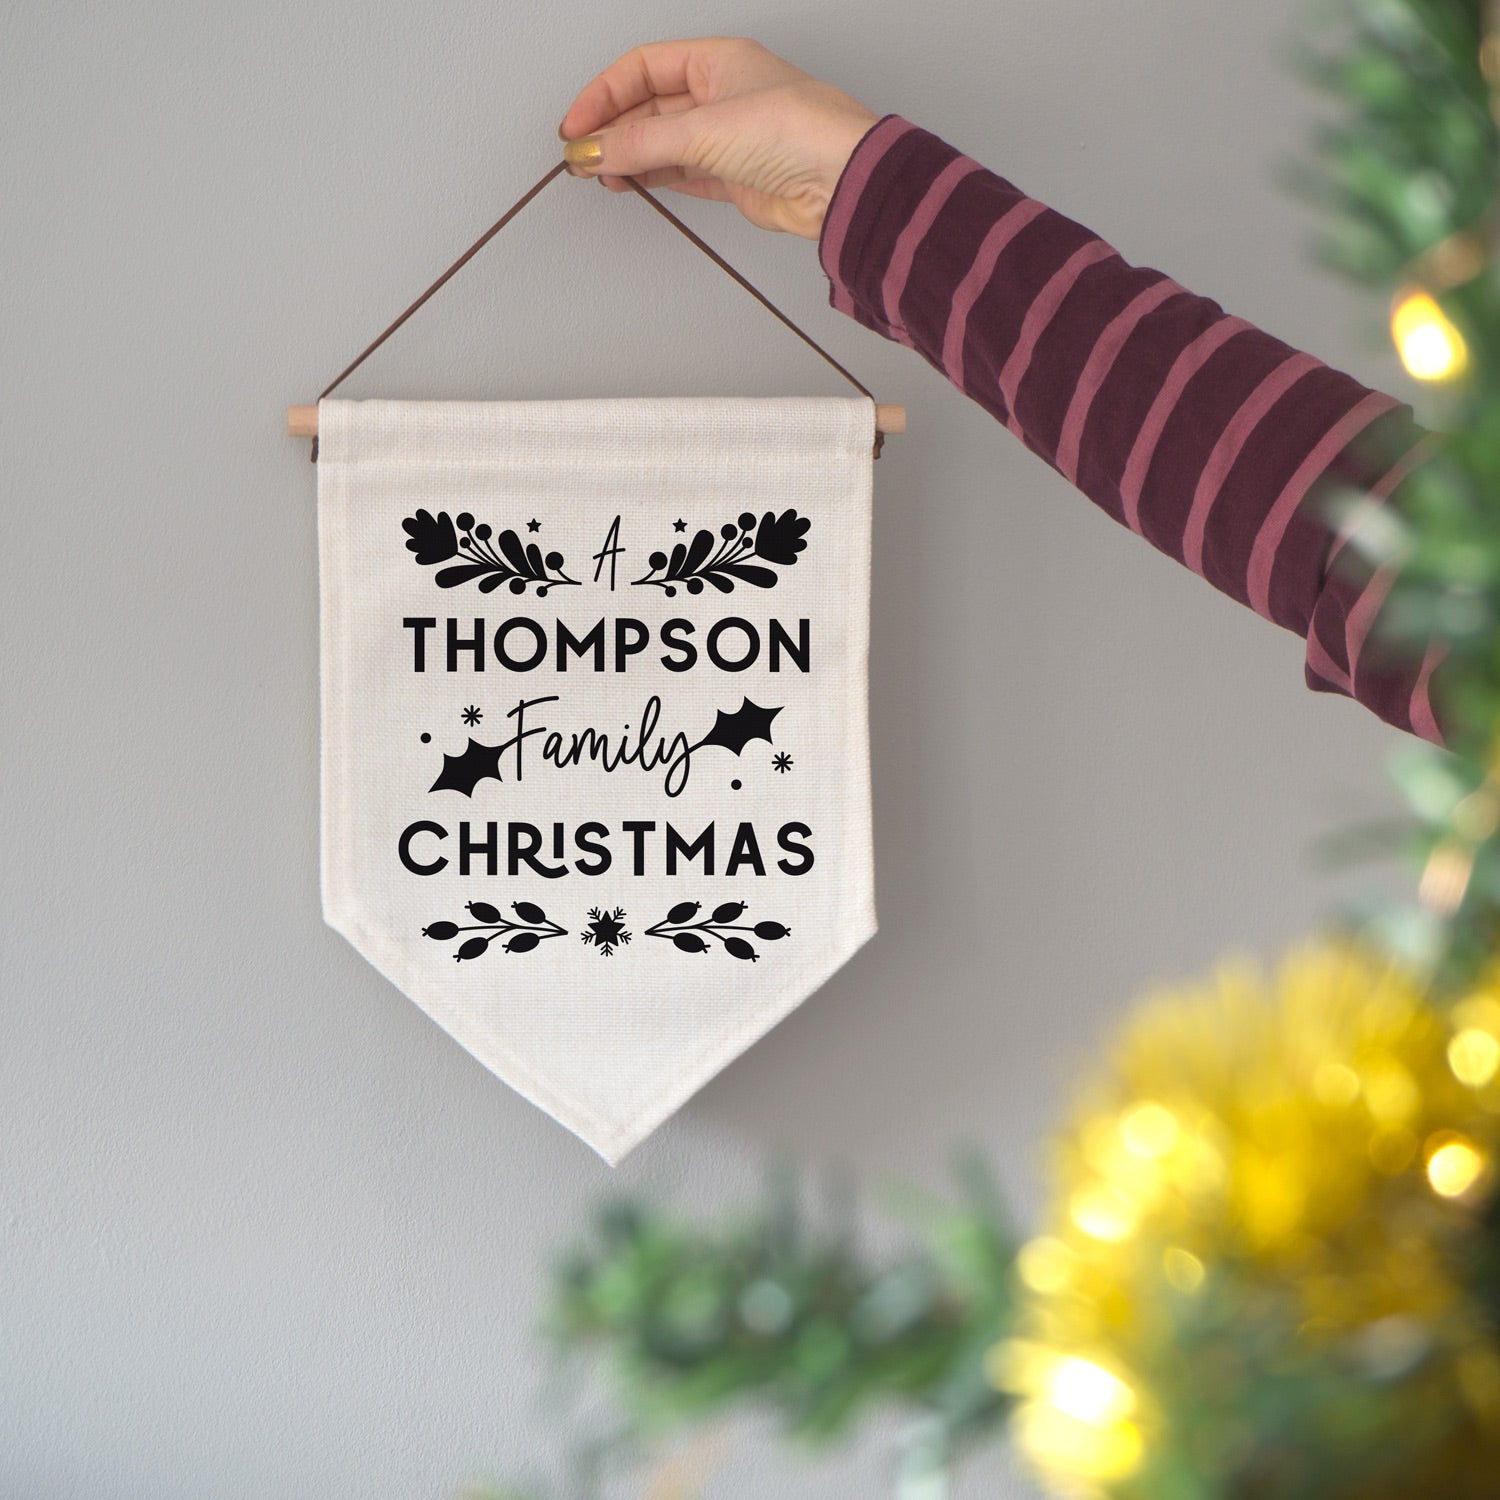 A personalised family Christmas banner flag personalised with your family name and adorned with festive flourishes! Each flag has a black print on natural coloured linen.